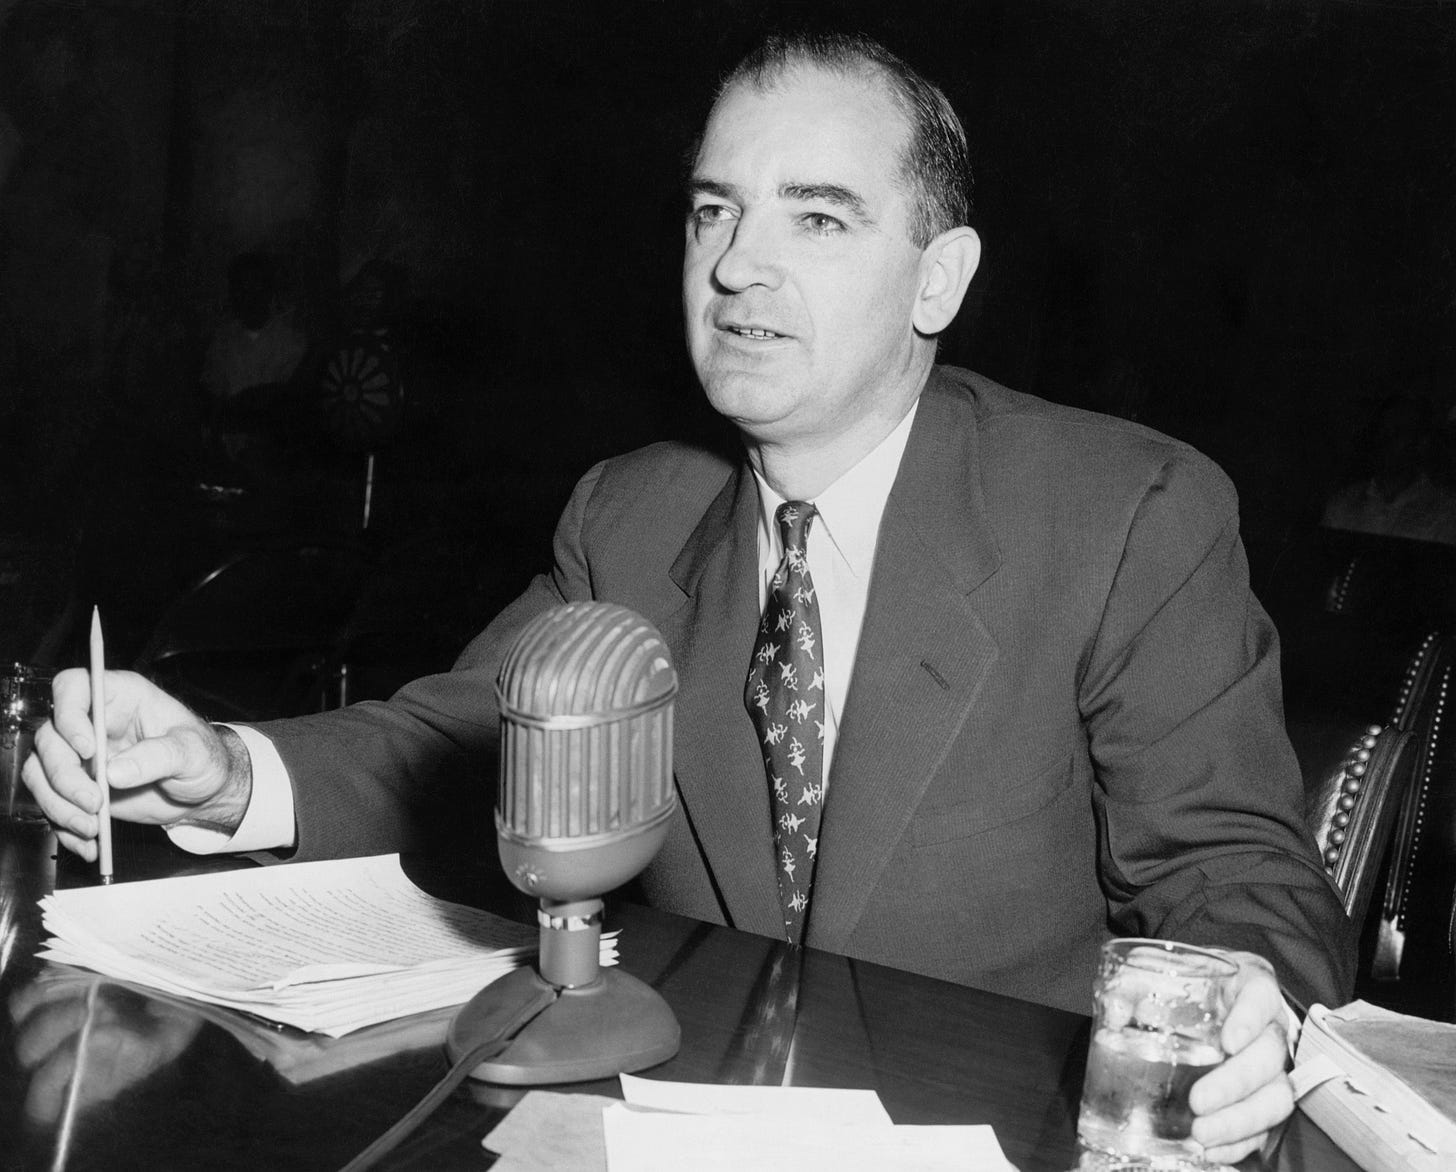 Joseph McCarthy and the Force of Political Falsehoods | The New Yorker